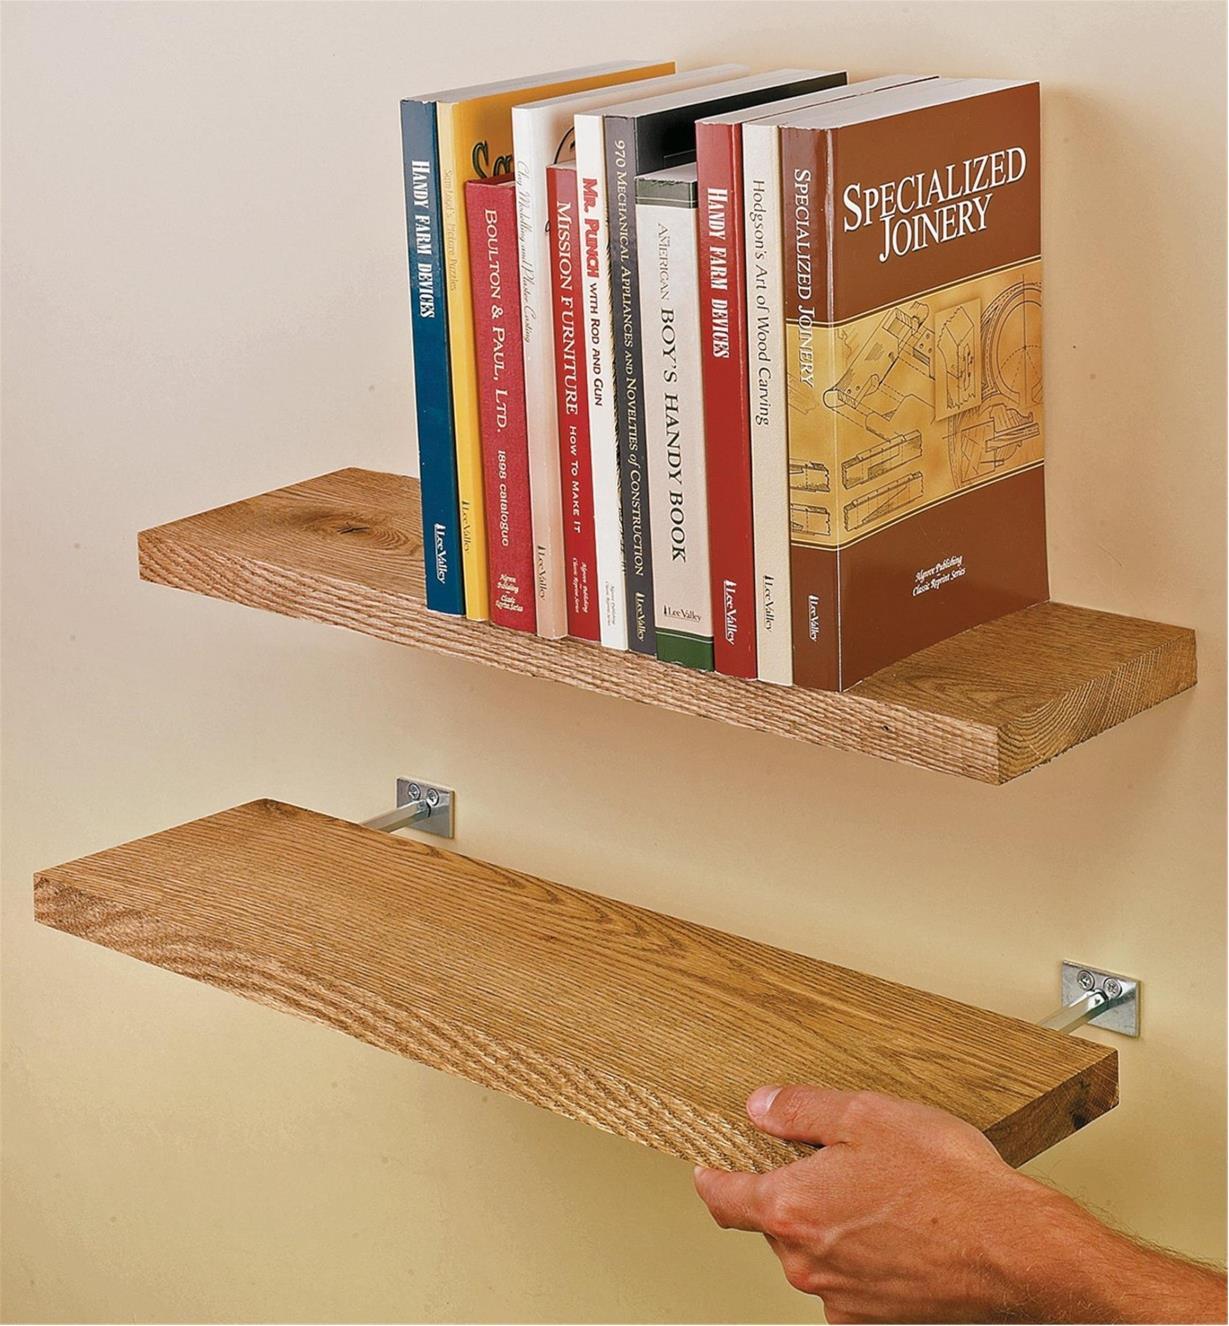 00S0520 - Blind Shelf Supports, pair